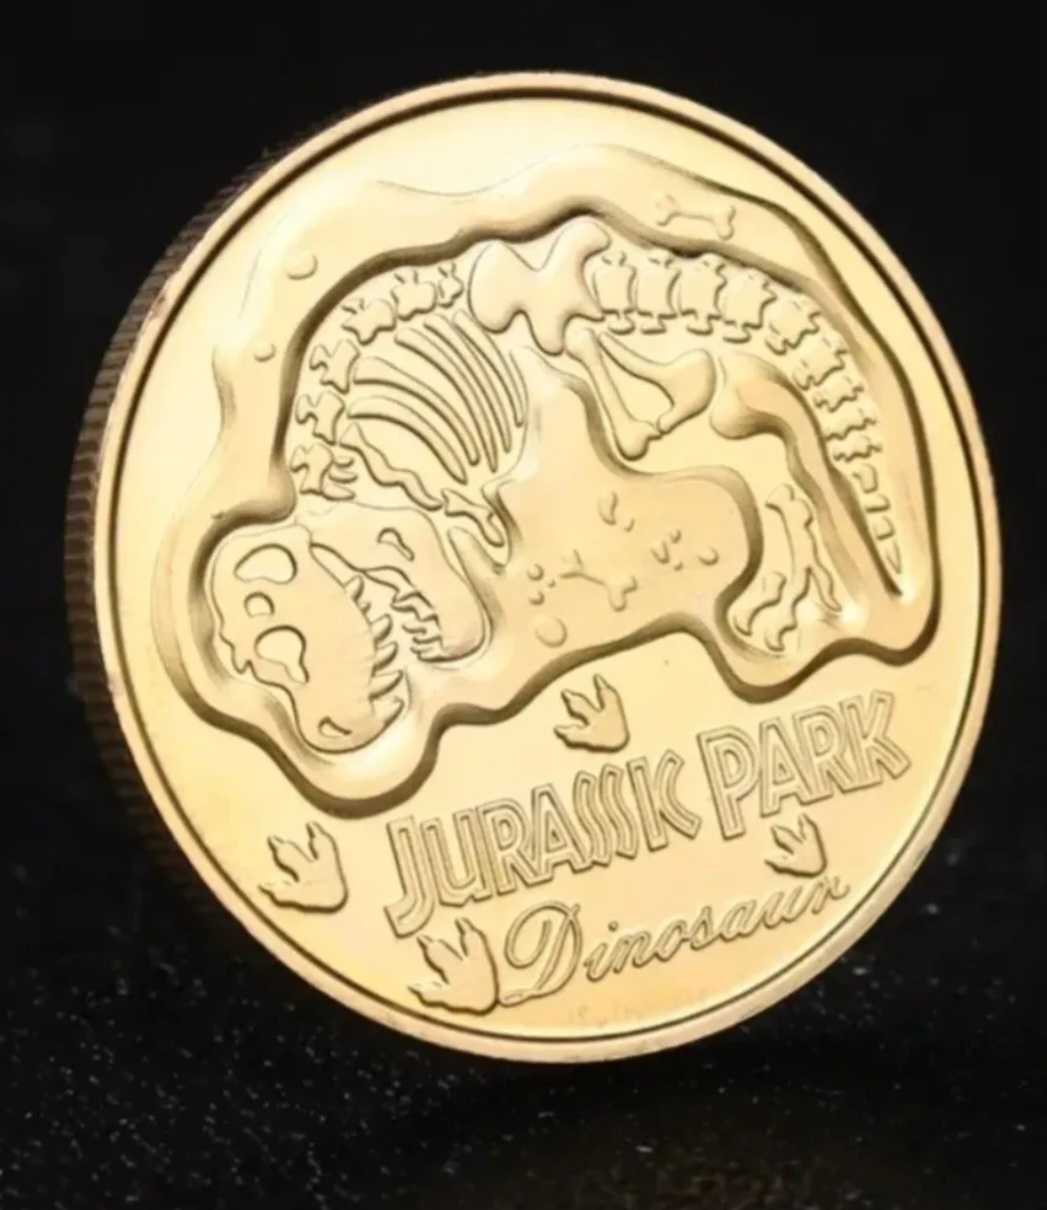 Jurassic Park T-Rex Collectable Commemorative Gold Plated Coin - Image 2 of 2